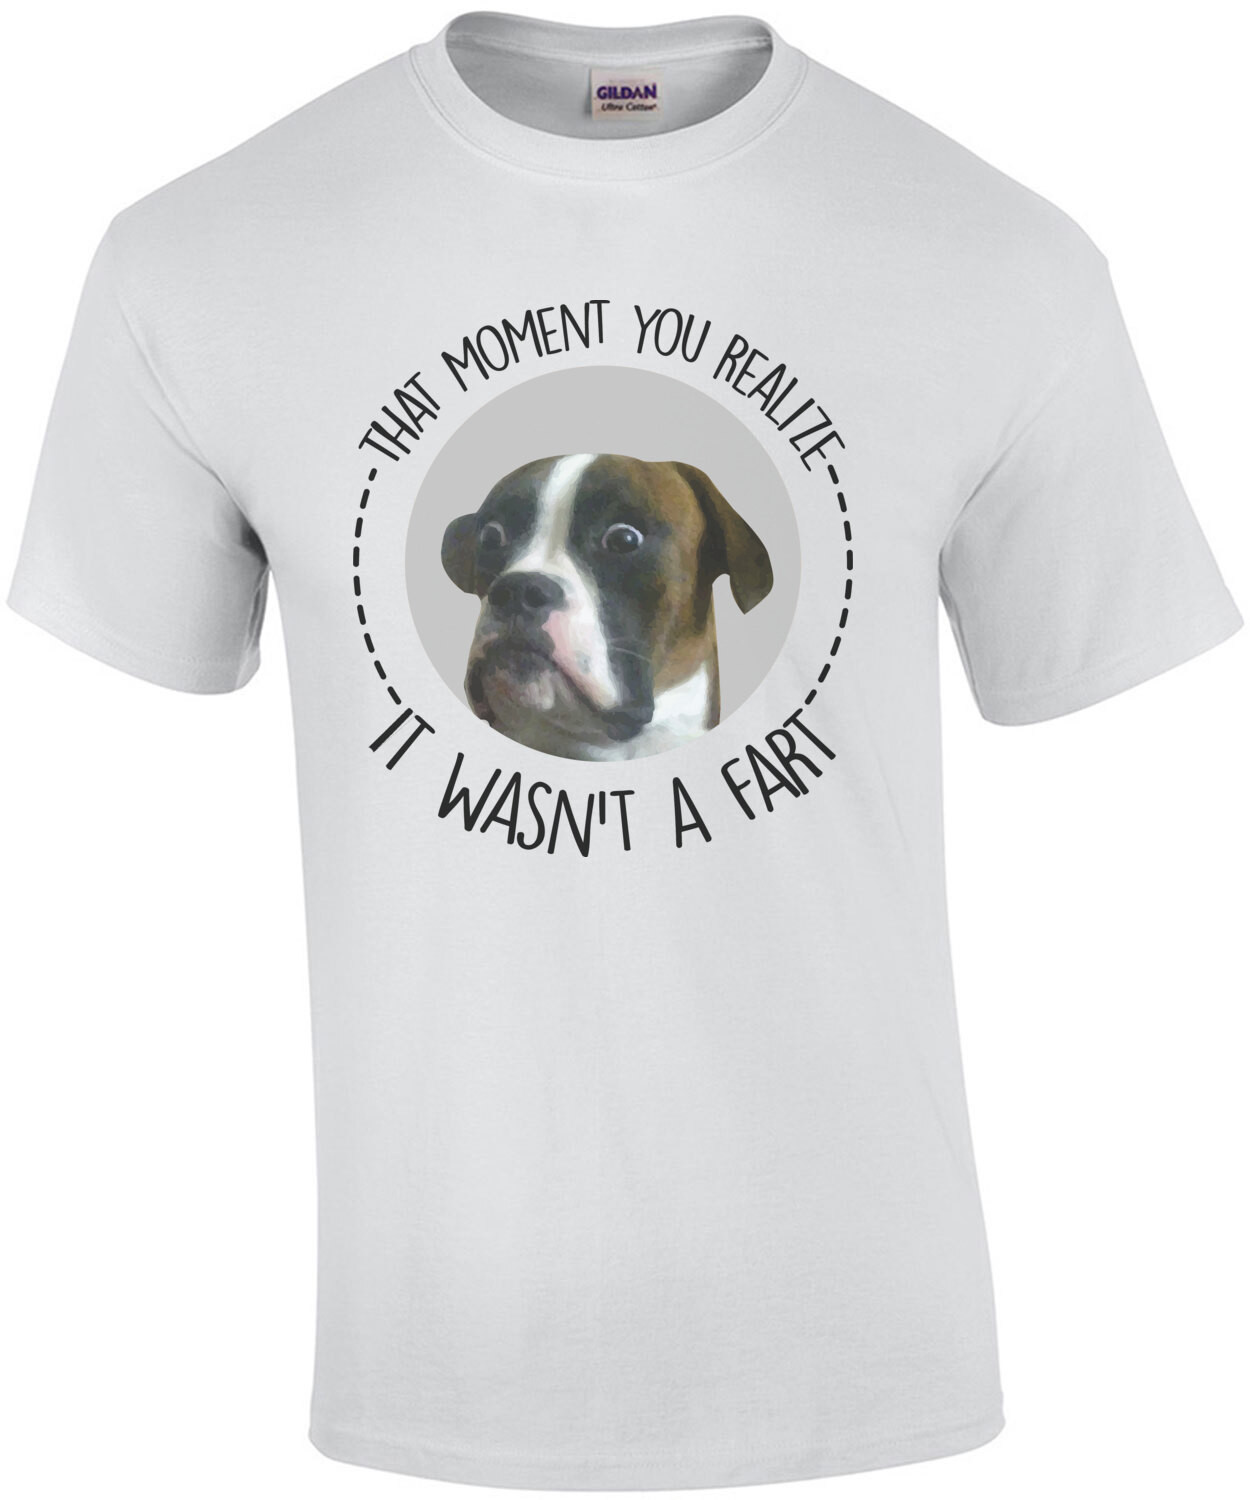 That moment you realize it wasn't a fart - funny dog t-shirt